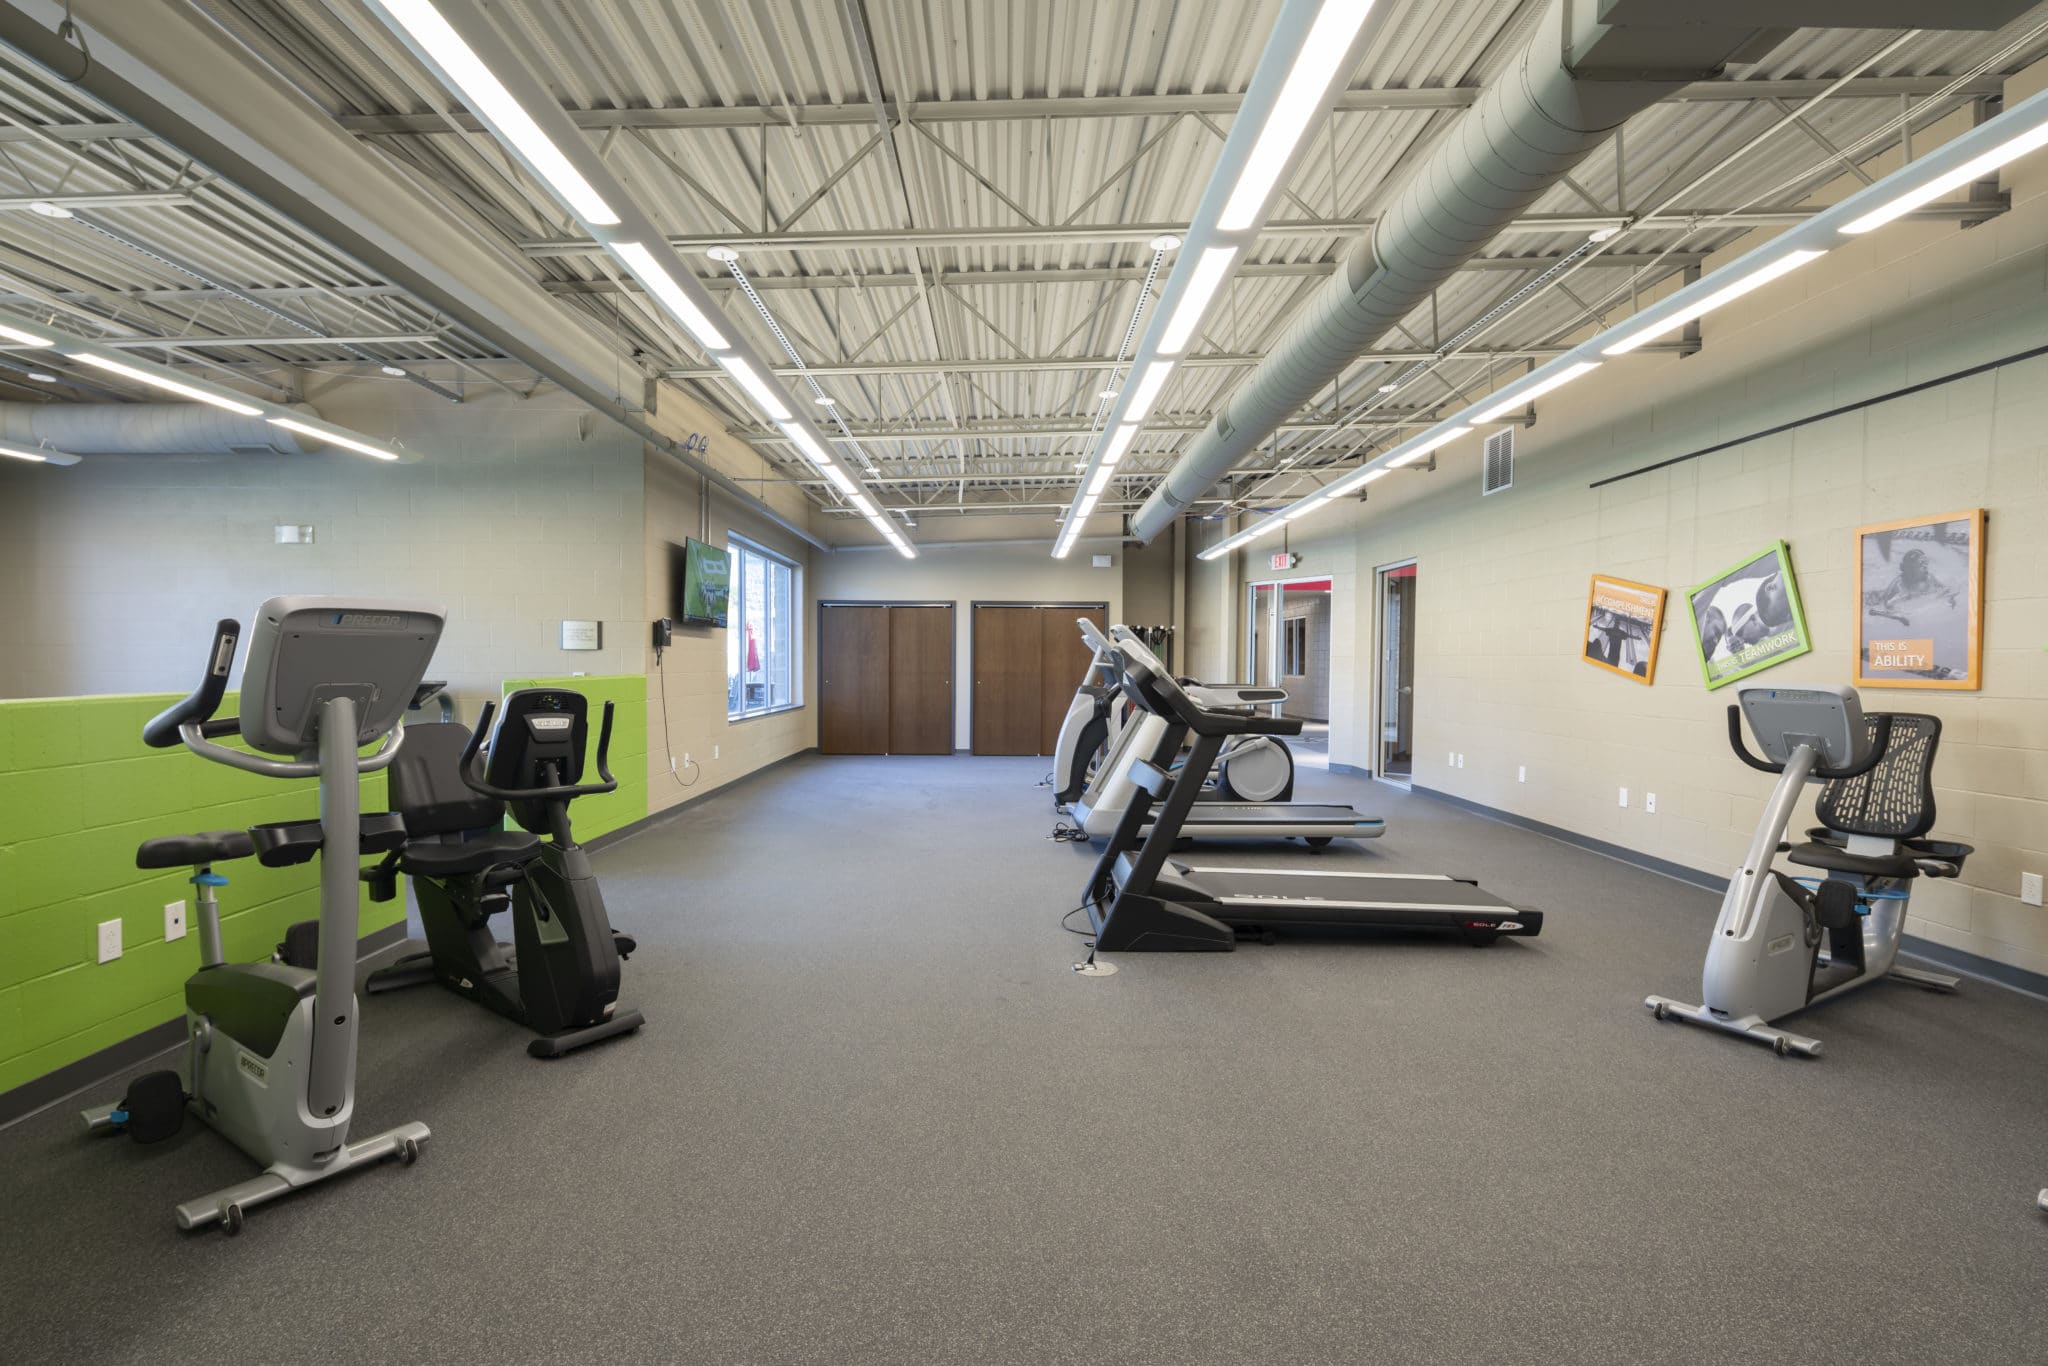 Treadmills and stationary bicycles in the fitness center at the Training for Life Campus